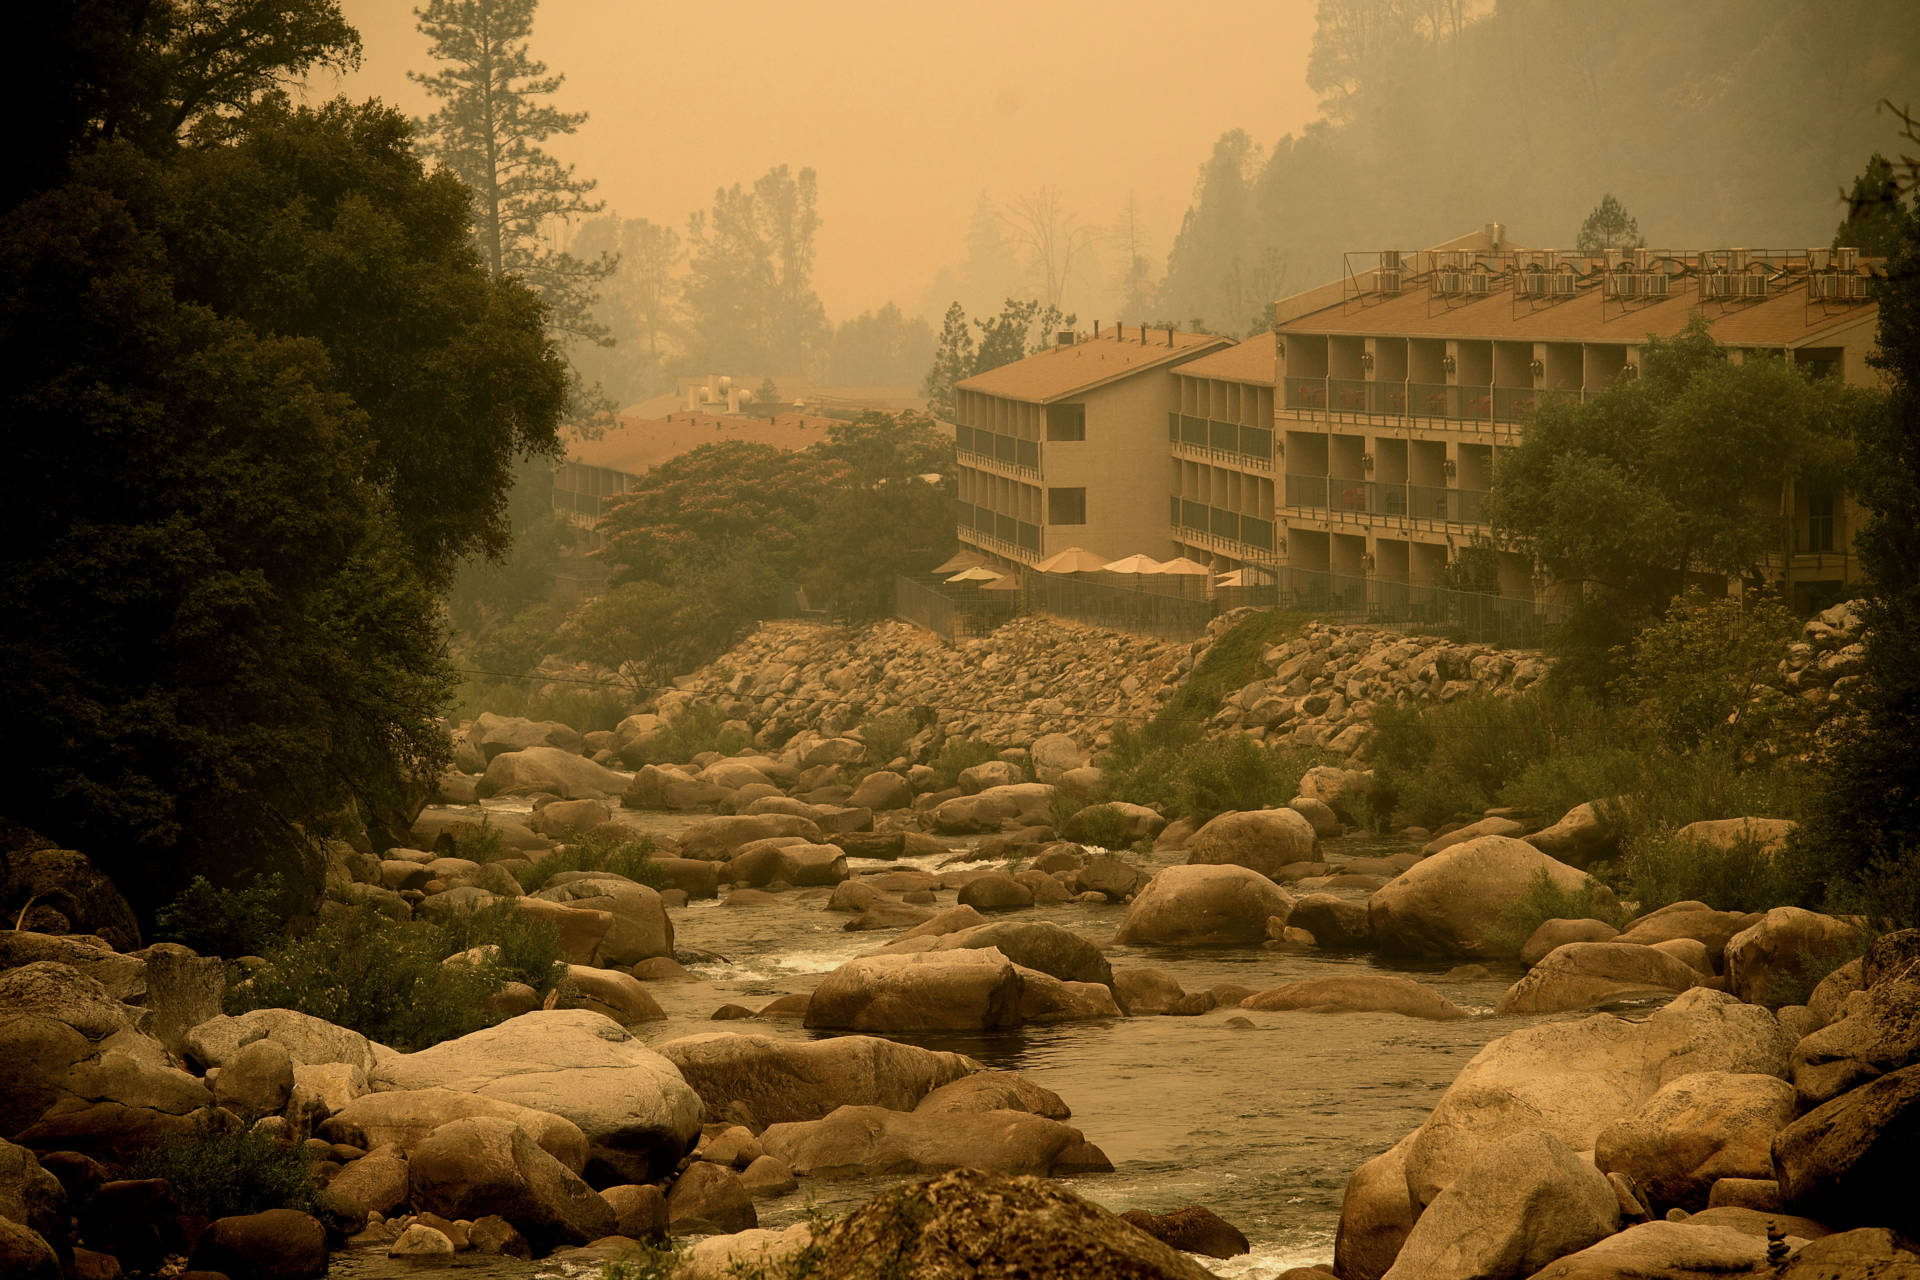 The Yosemite View Lodge in El Portal was shrouded in smoke at the end of July, during the peak of the Ferguson fire.  NOAH BERGER/AFP/Getty Images